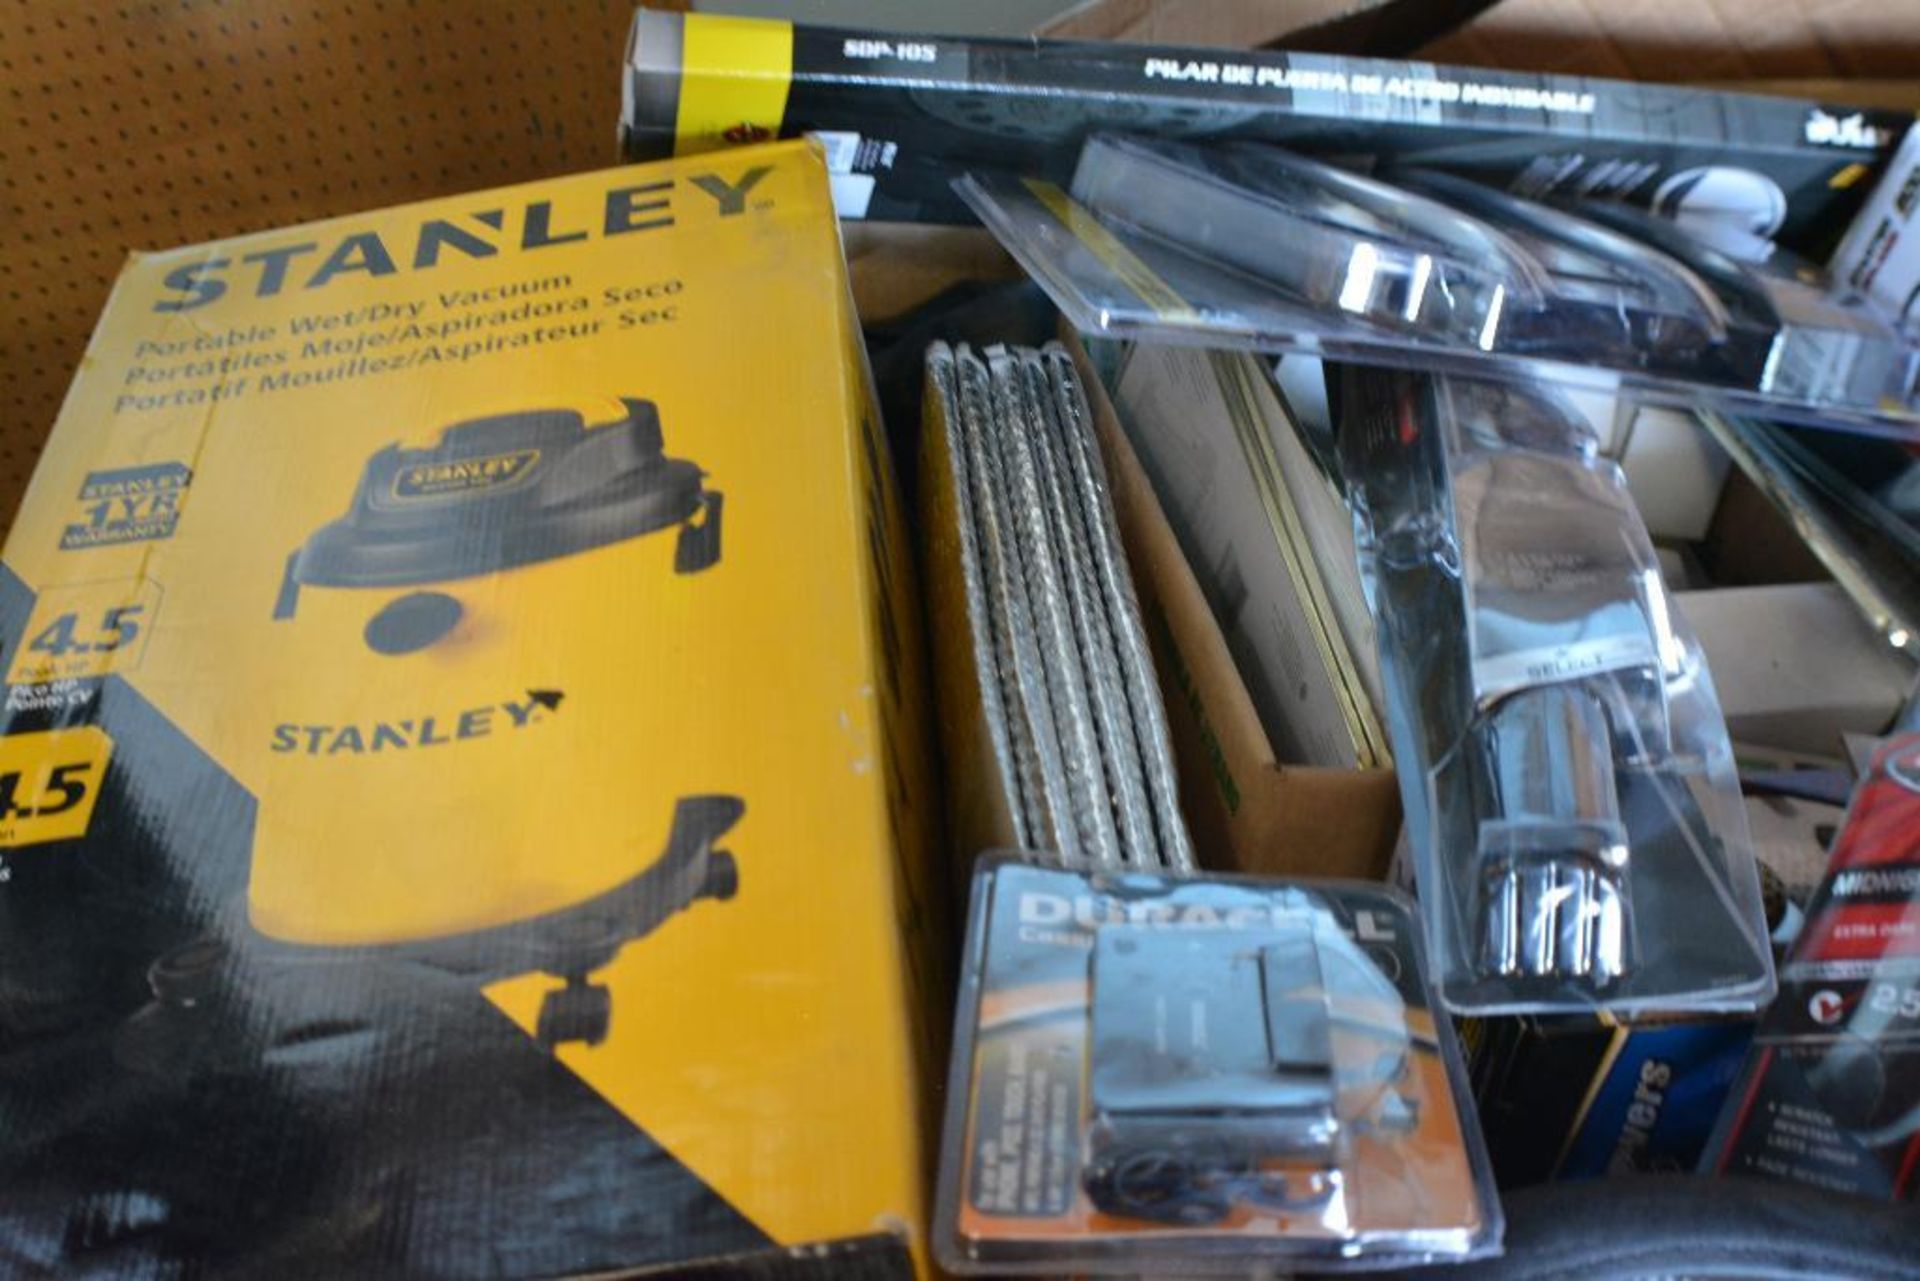 Stanley Portable Wet/Dry Vacuum + Good Year 1/2" 24V Cordless Impact Wrench + Steering Wheel - Image 5 of 6